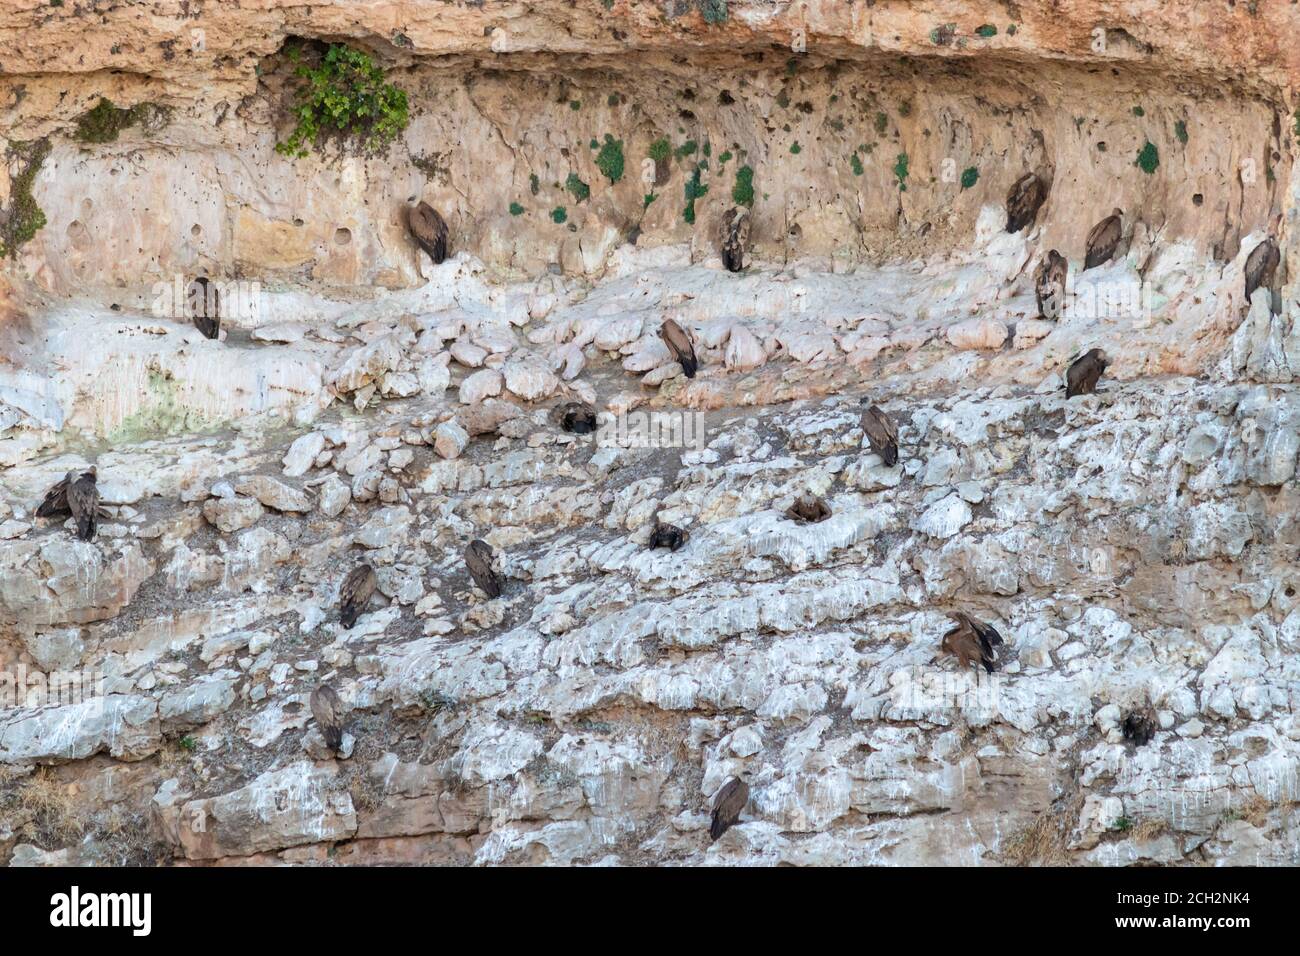 Group of griffon vultures resting on a vertical wall, sleeping inside the wholes. White depositions on the rocky wall. Scientific name: Gyps fulvus. H Stock Photo